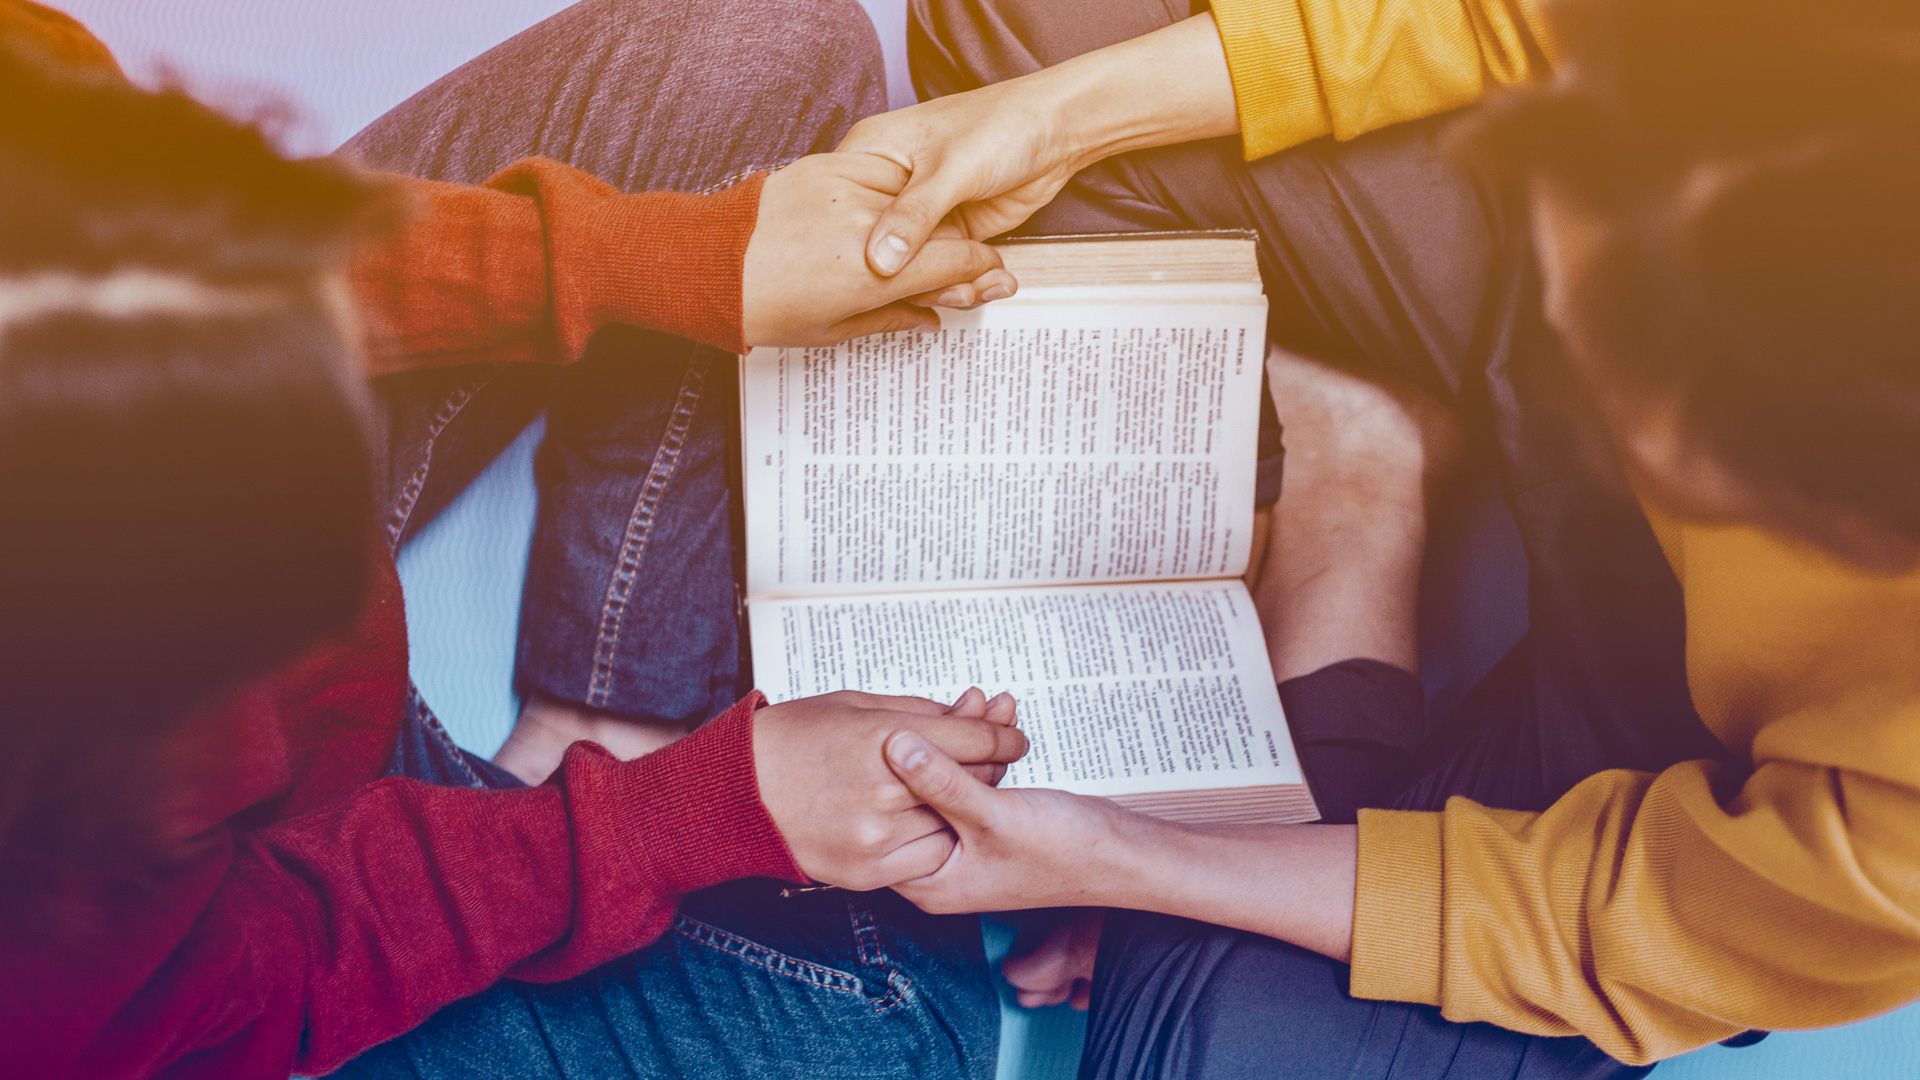 two young people hold hands across an open bible as if praying.